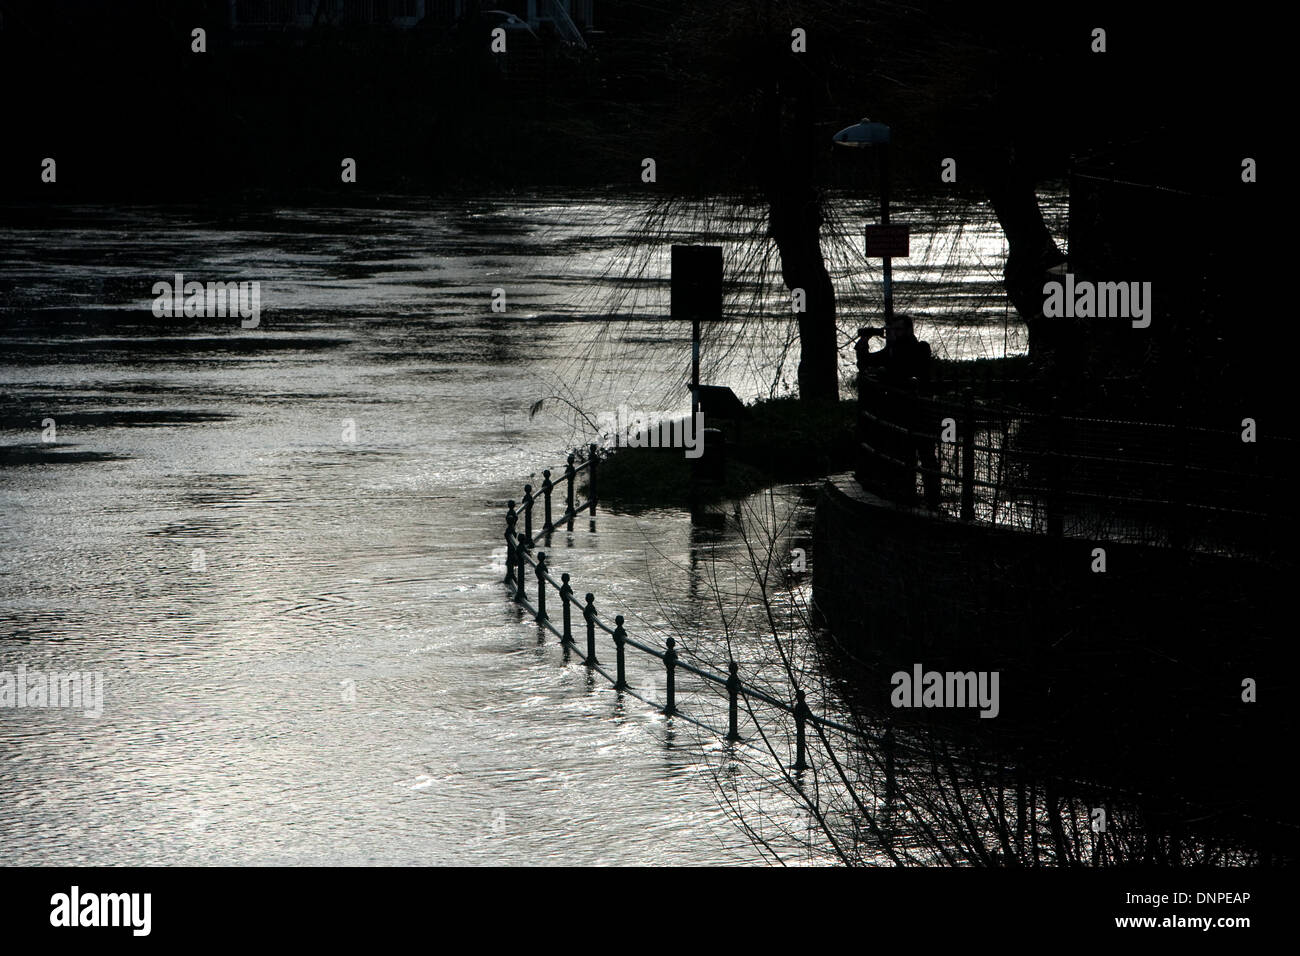 Shrewsbury, Shropshire, UK. 3rd January 2014. A man photographs the flooded River Severn near to English Bridge in Shrewsbury, Shropshire. The riverside footpath is covered in water as further rain is predicted over the weekend. Stock Photo